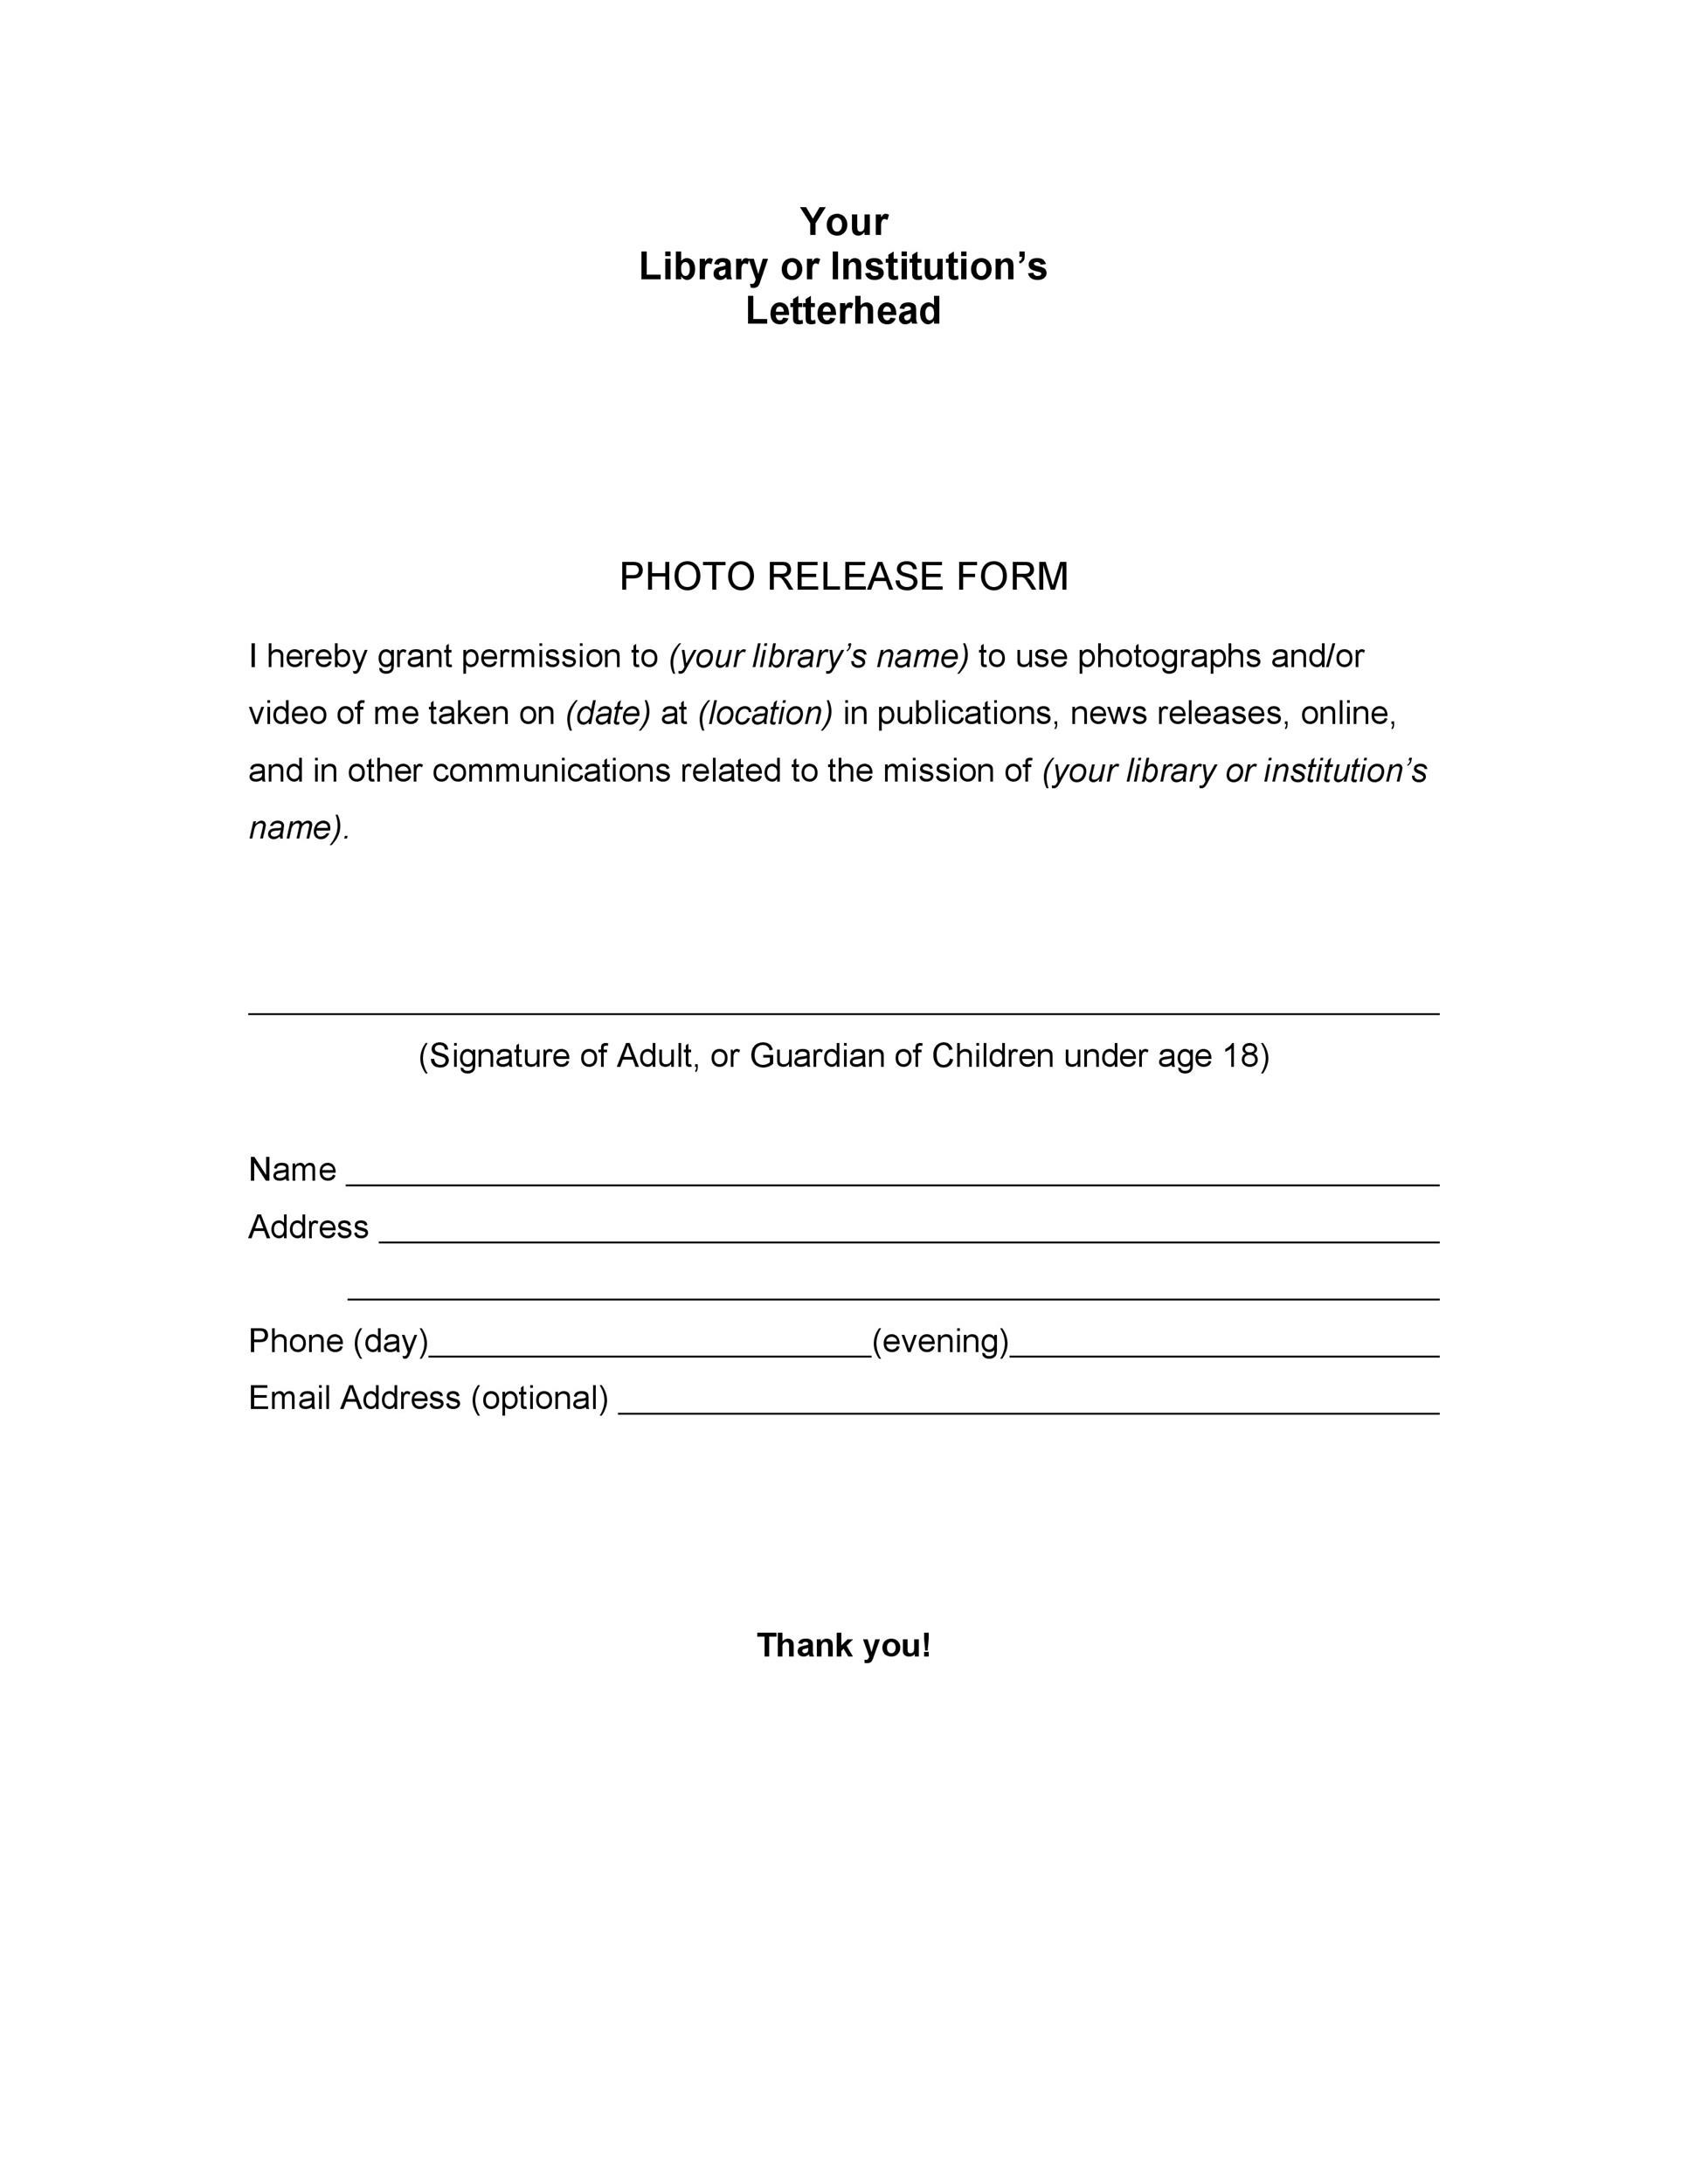 Free photo release form 24